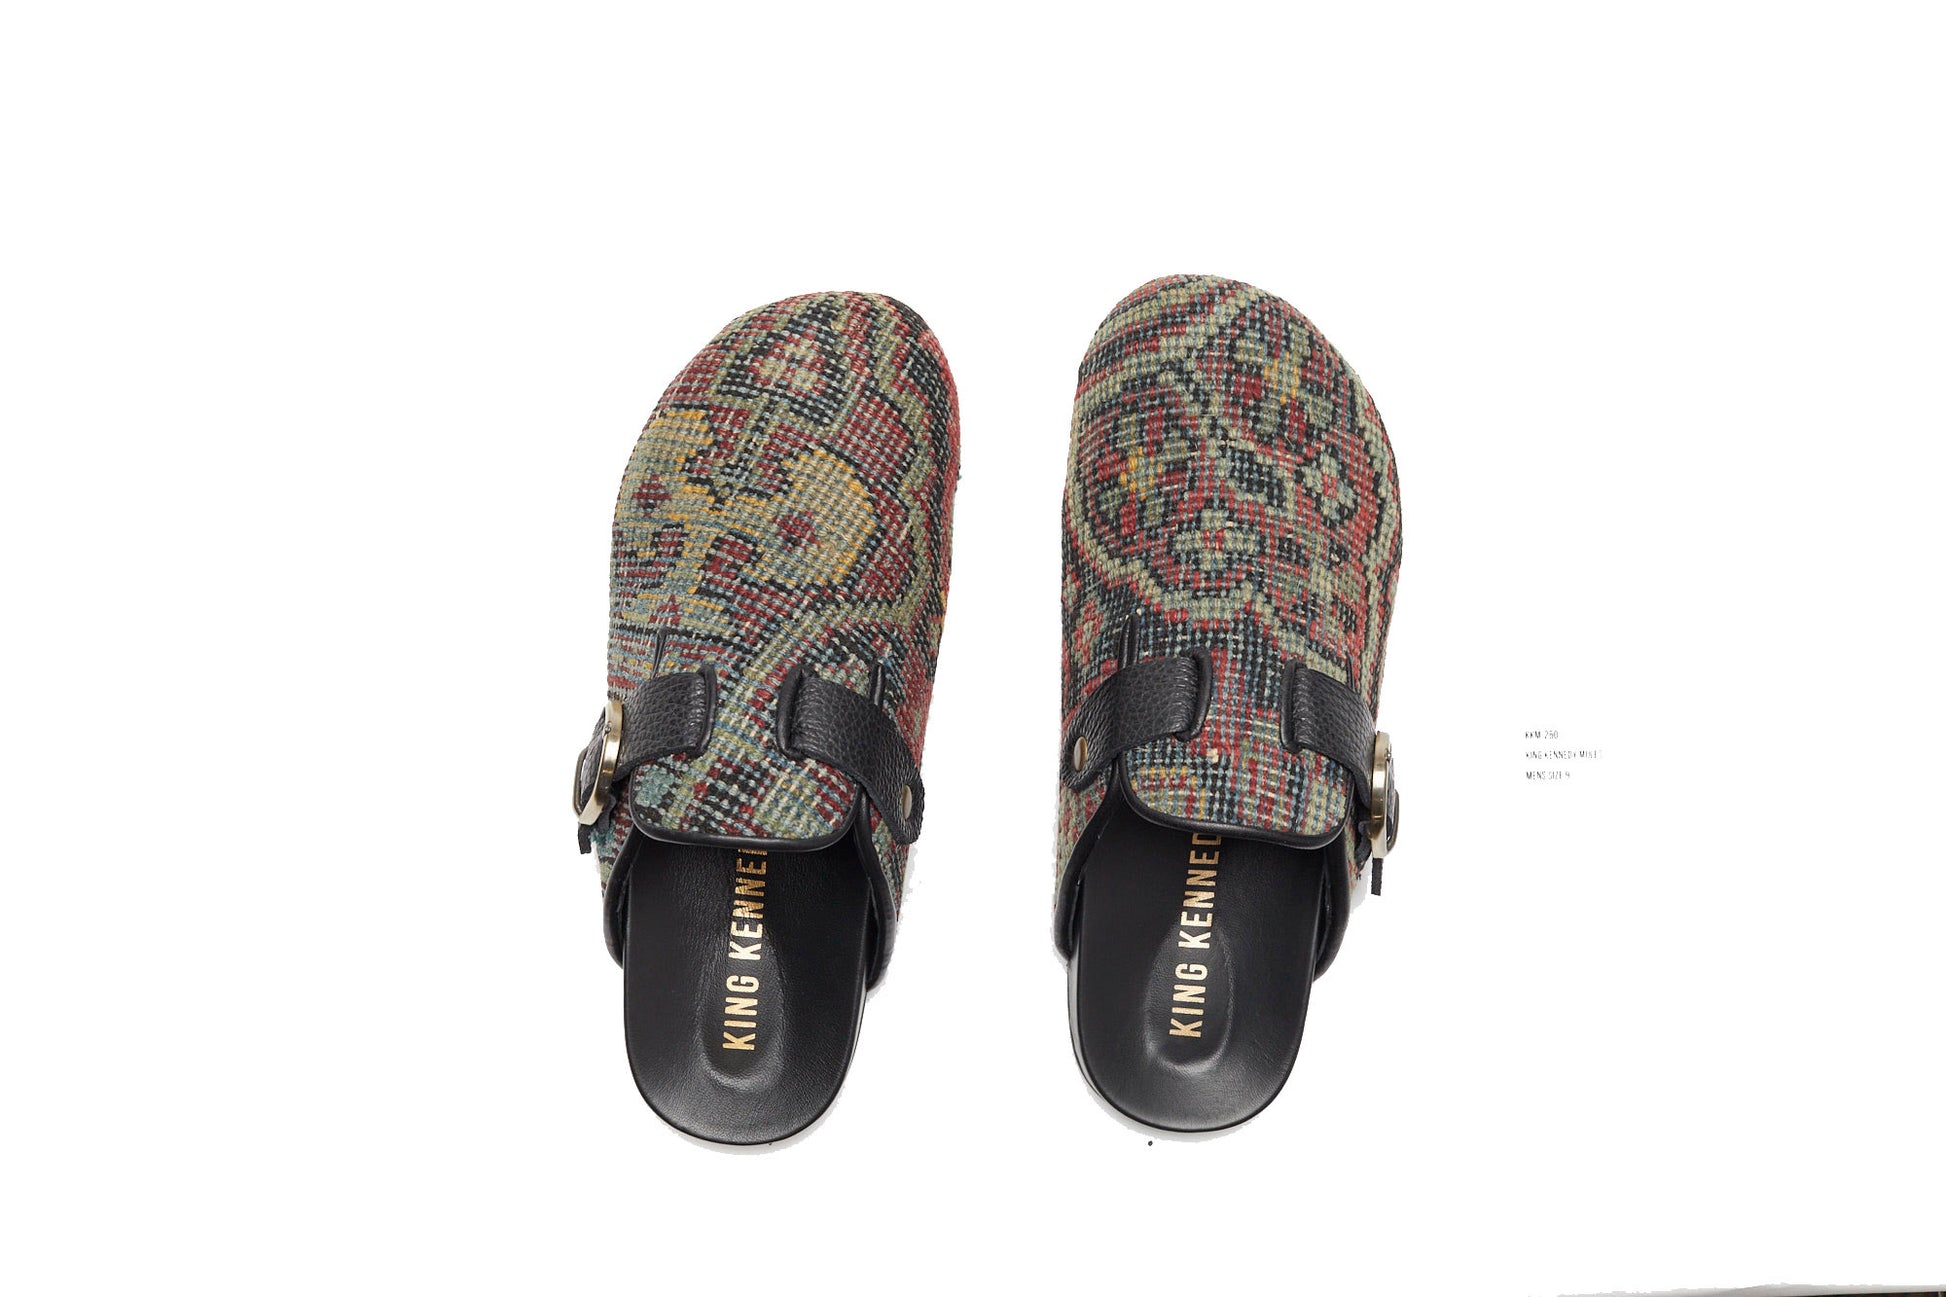 King Kennedy Rug Mules are one-of-a-kind and made of 100 year old antique Persian rug fragments with soft lambskin footbed and rubber sole. This pair is made of an antique Persian rug with beautifully faded pattern in green, red and yellow. 